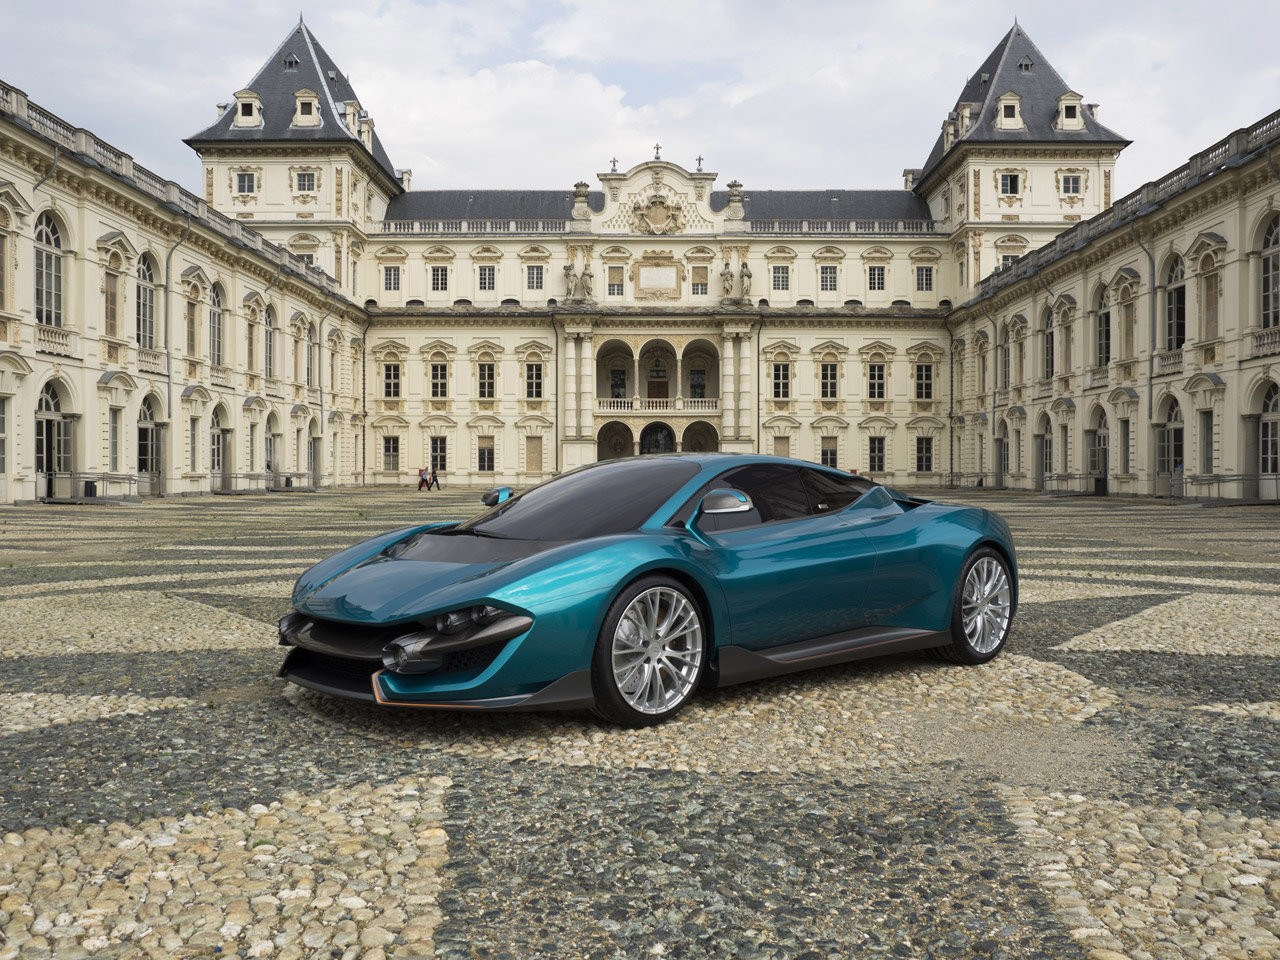 torino-design-ats-wildtwelve-is-a-hybrid-hypercar-that-can-do-390-km-h-photo-gallery_2